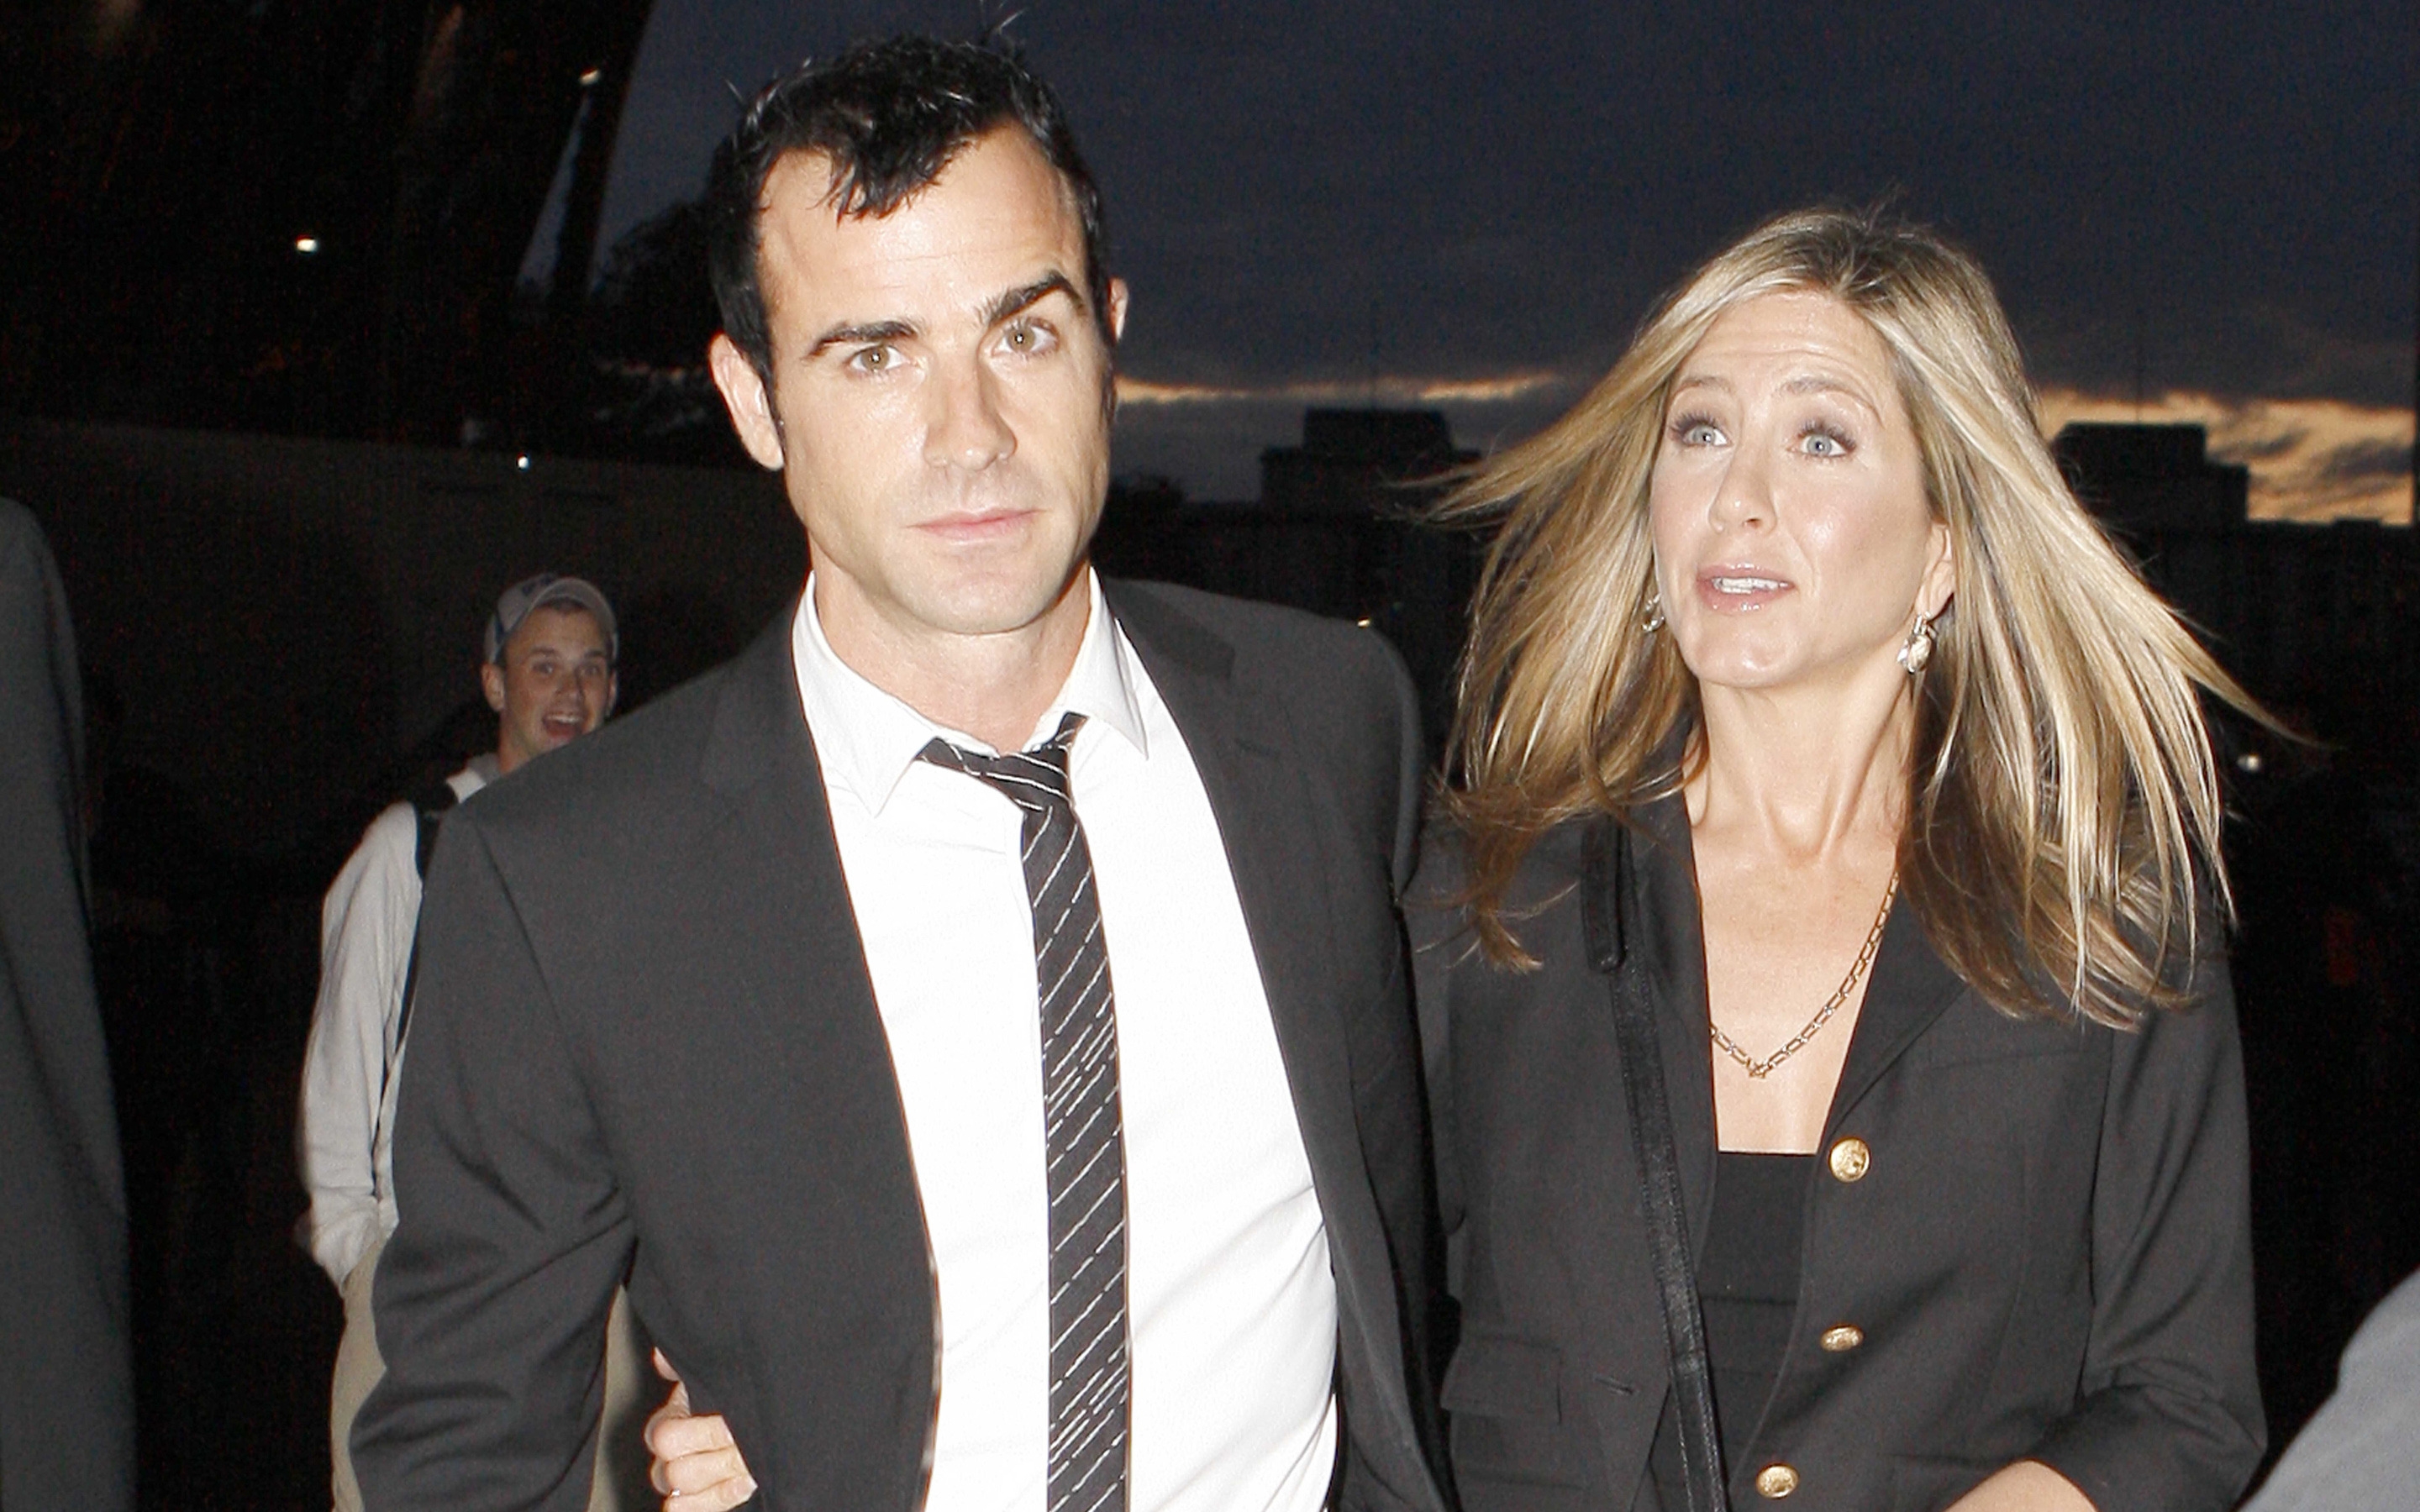 Jennifer Aniston and Justin Theroux for 2880 x 1800 Retina Display resolution